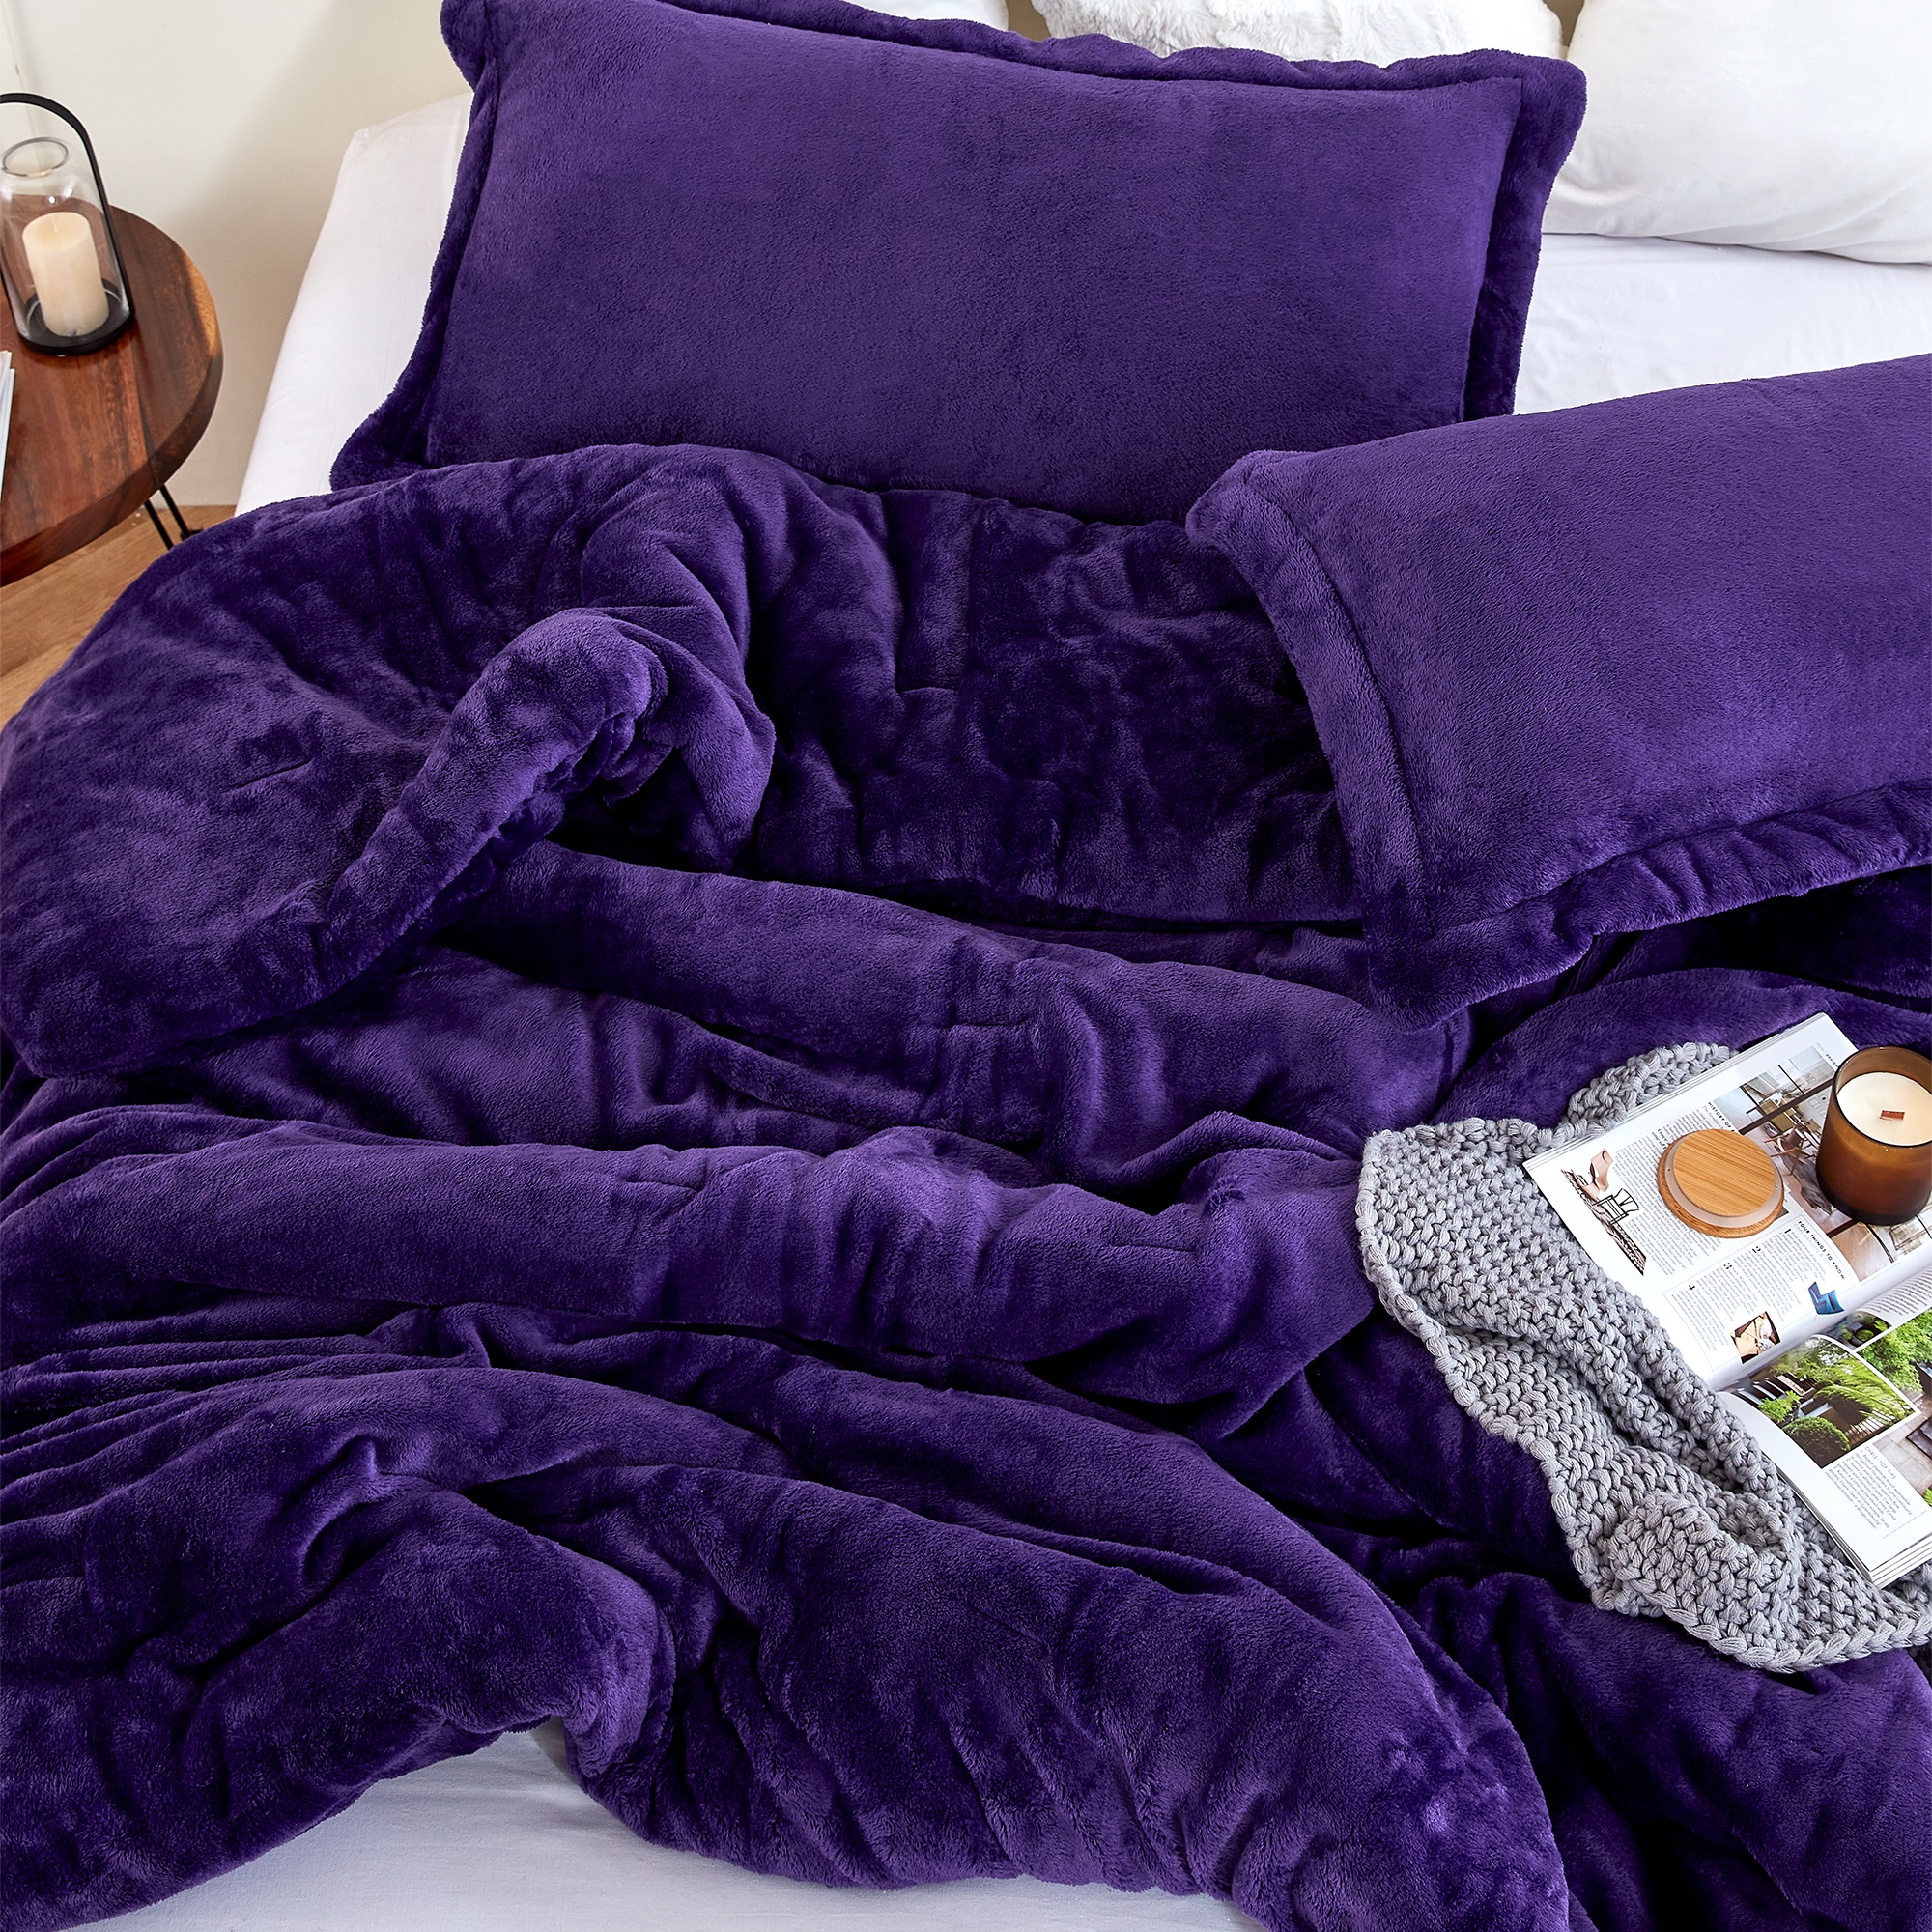 Coma Inducer Oversized Comforter - Me Sooo Comfy - Purple Reign